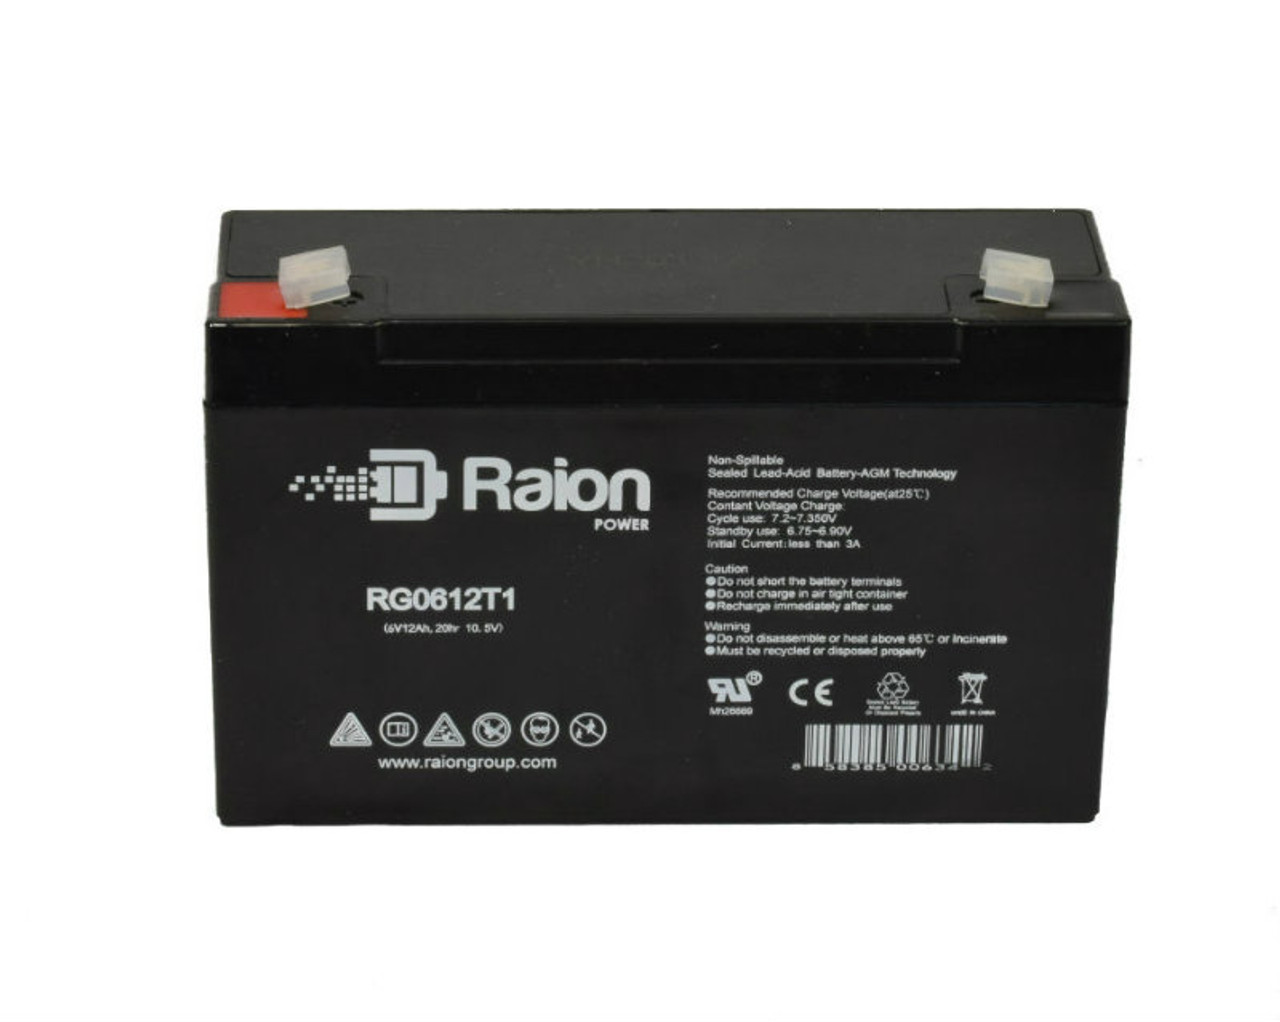 Raion Power RG06120T1 Replacement Battery Cartridge for APC BACKUPS BK800